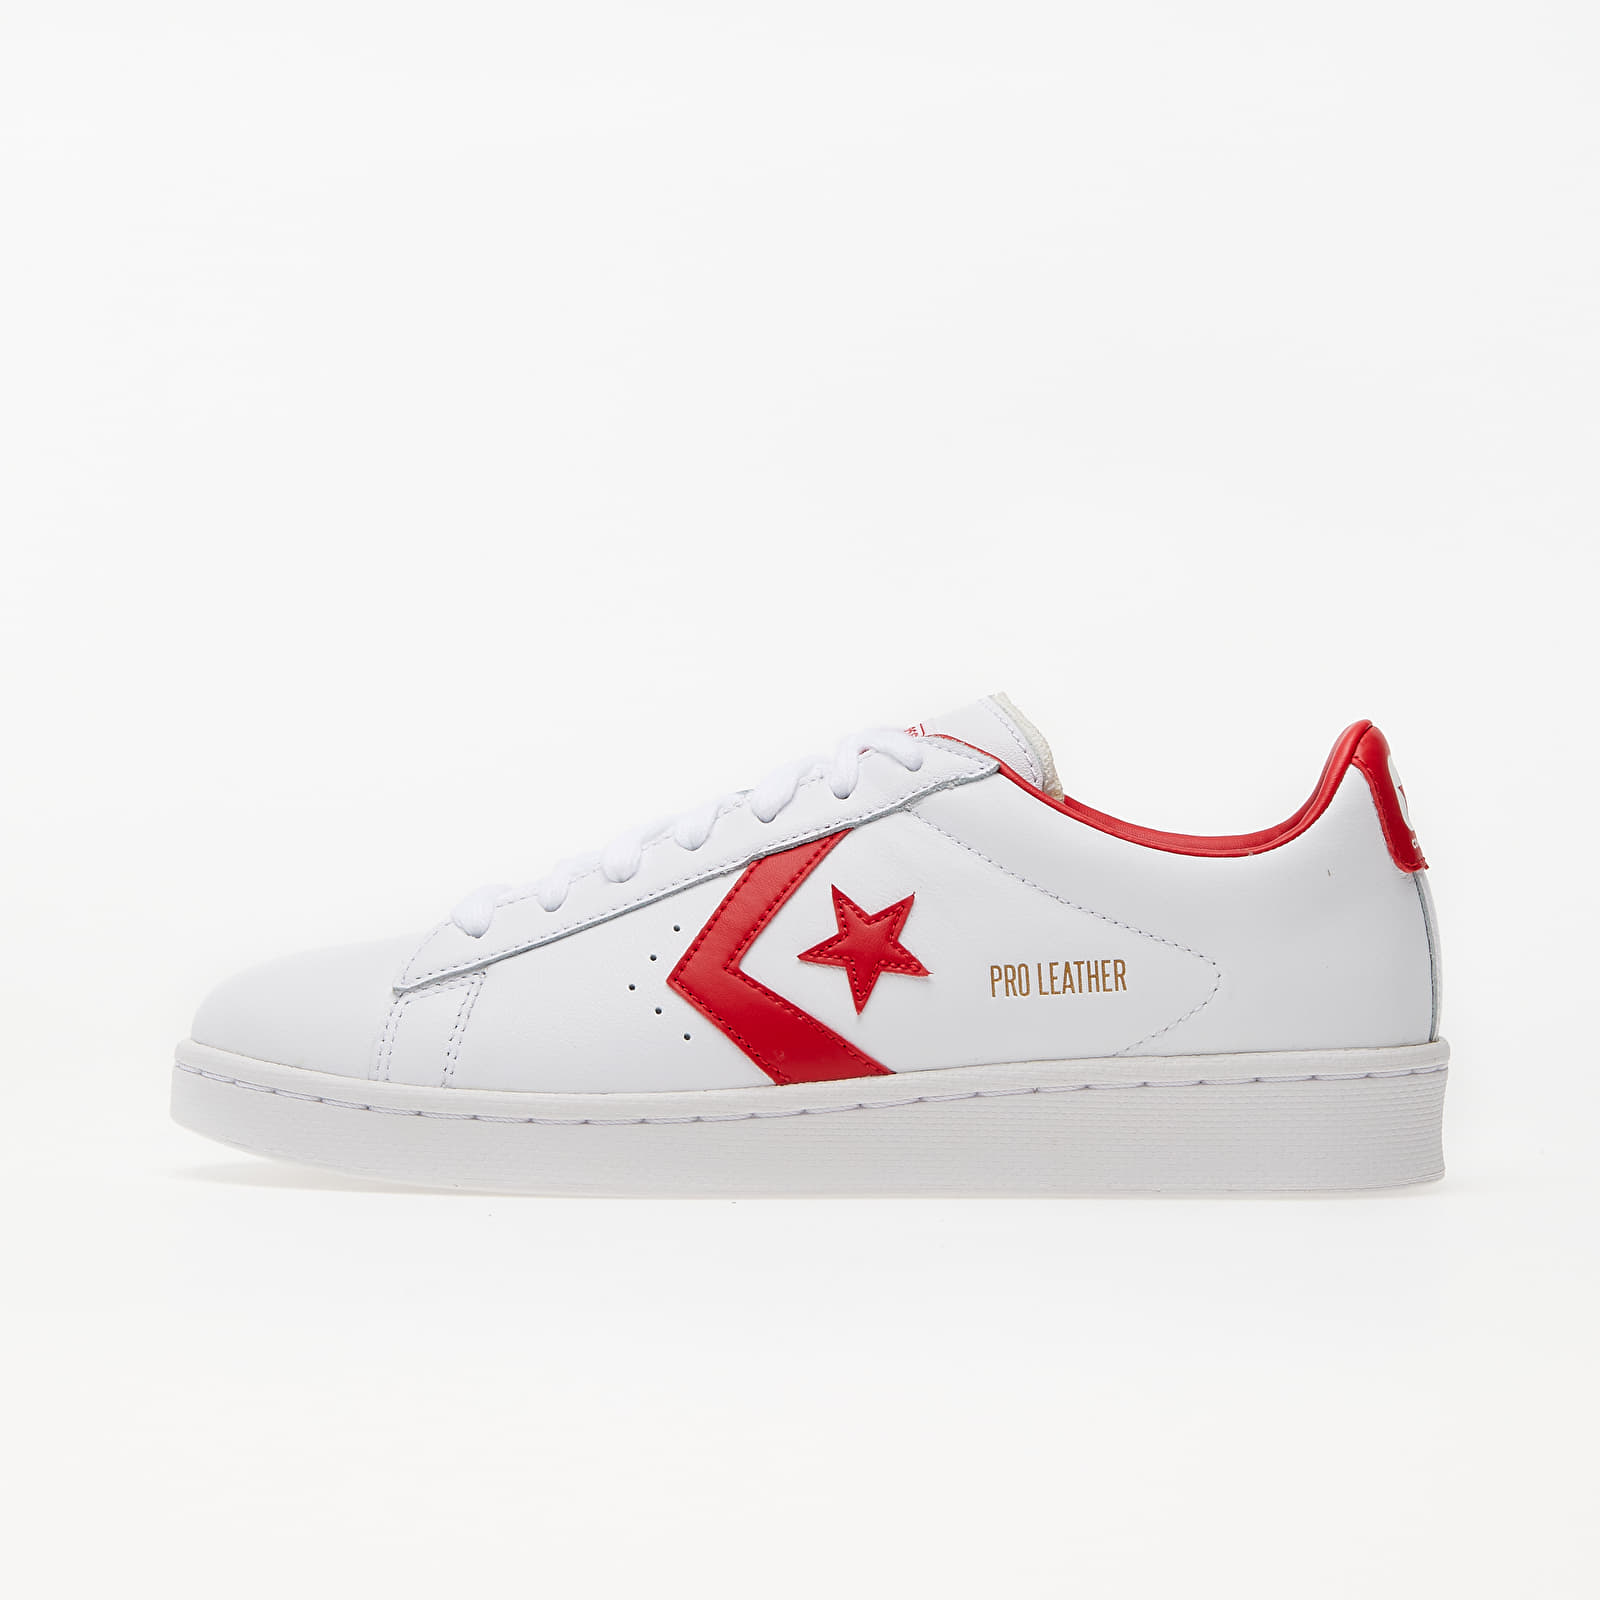 Converse Pro Leather Gold Standard White/ University Red 167970C